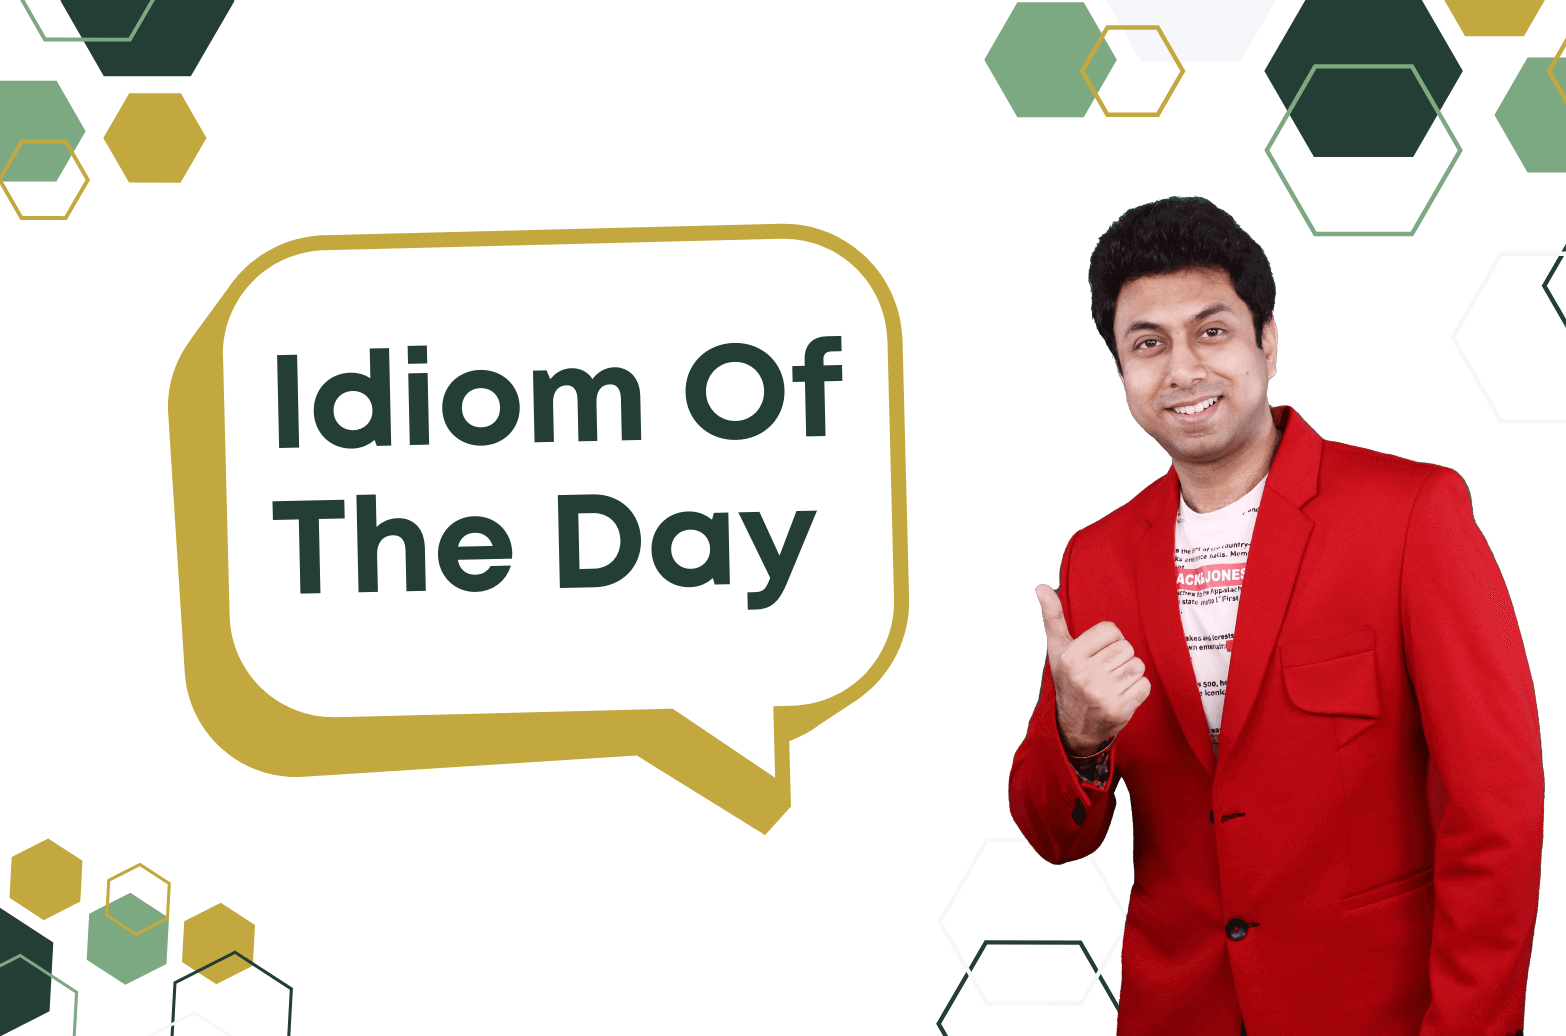 Idiom of The Day